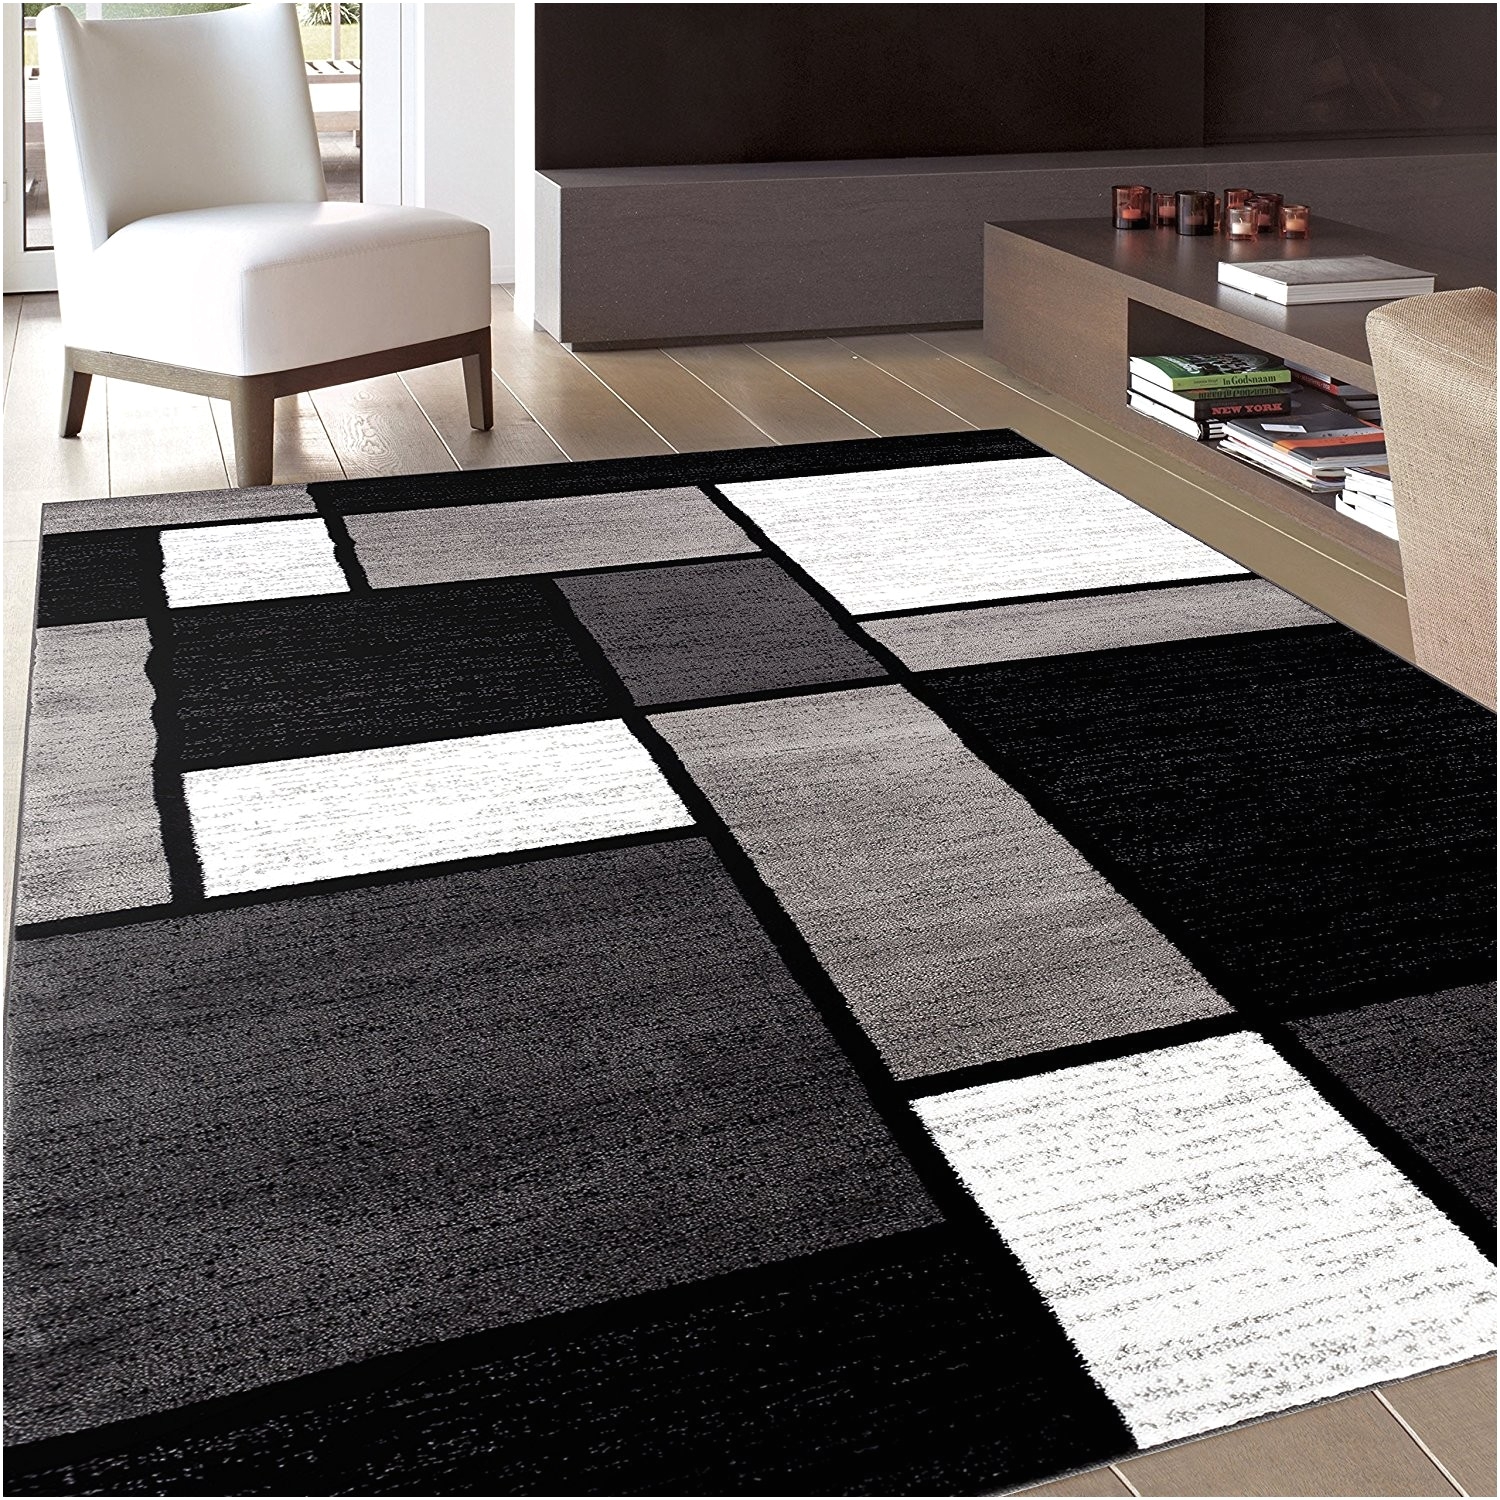 full size of home design safavieh shag rug beautiful black and white area rugs best large size of home design safavieh shag rug beautiful black and white